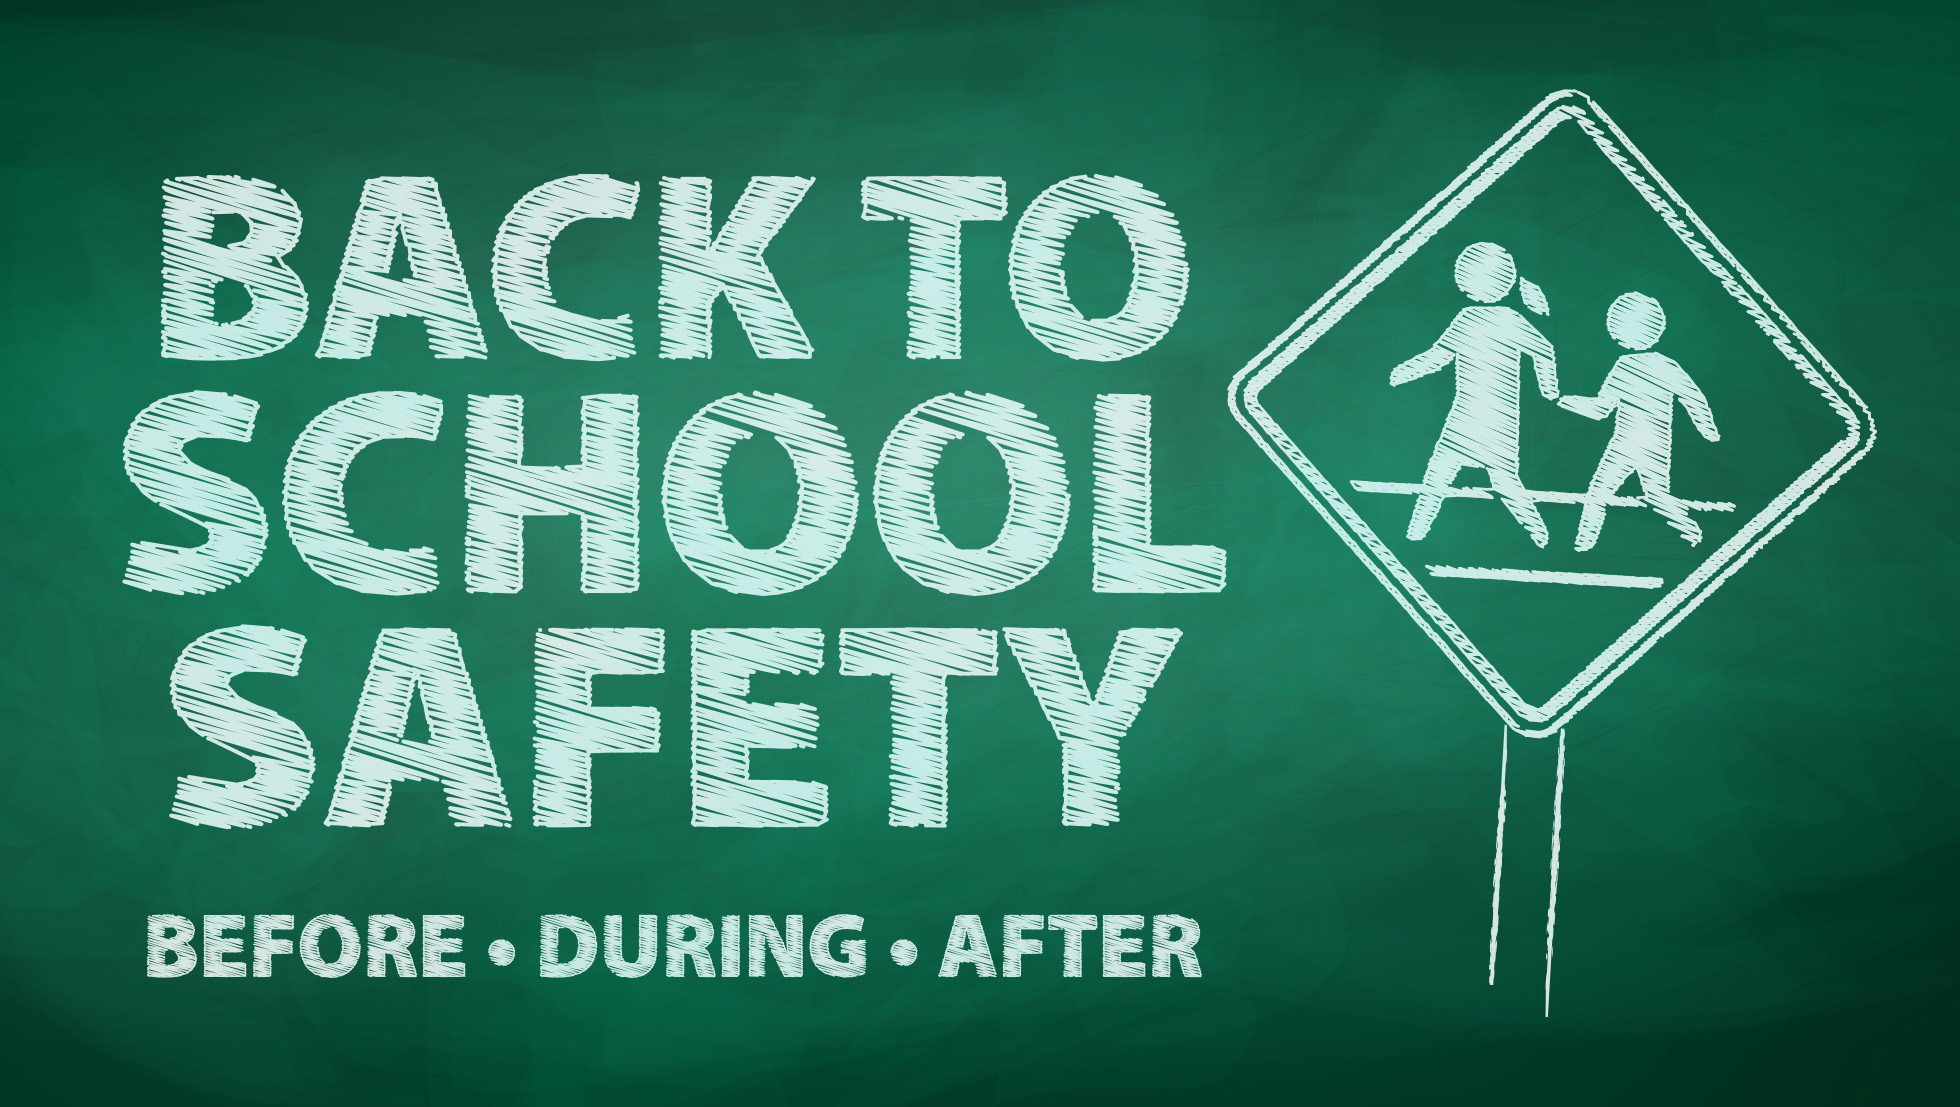 How to be safe when sharing back to school photos